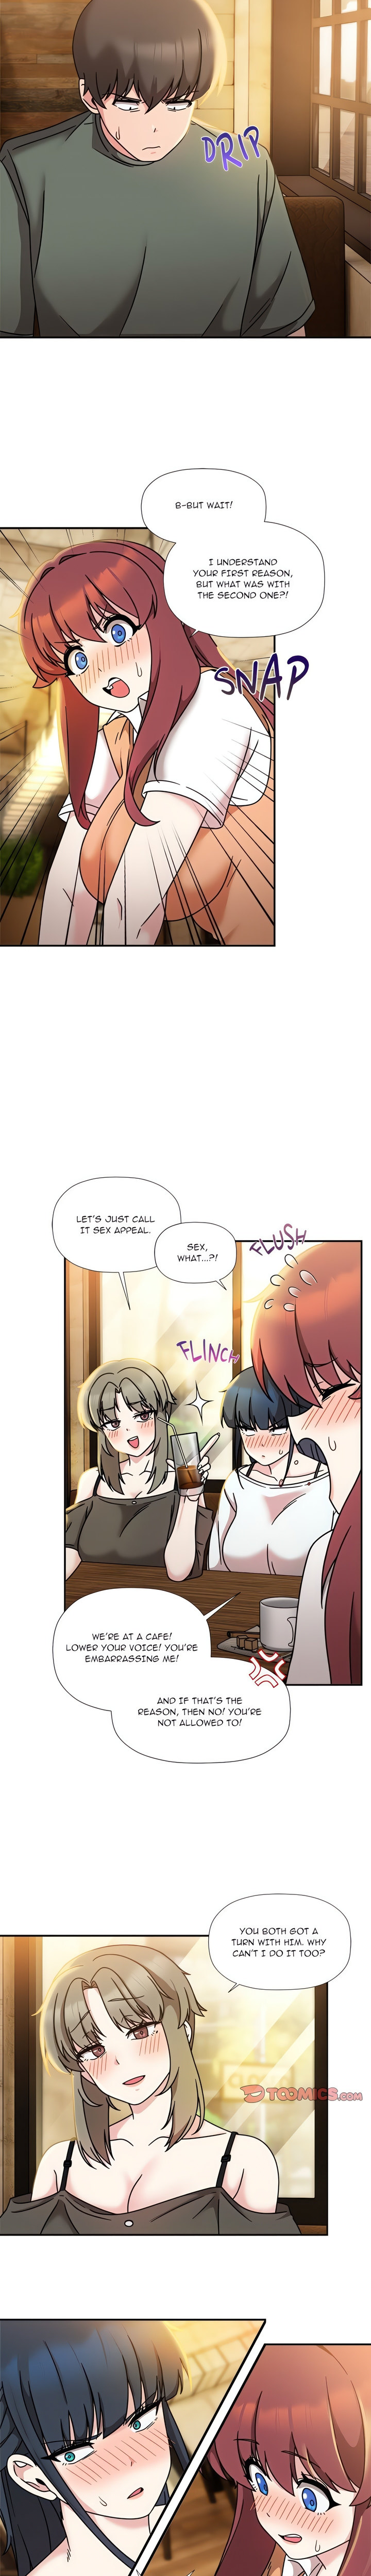 #Follow Me - Chapter 46 Page 8